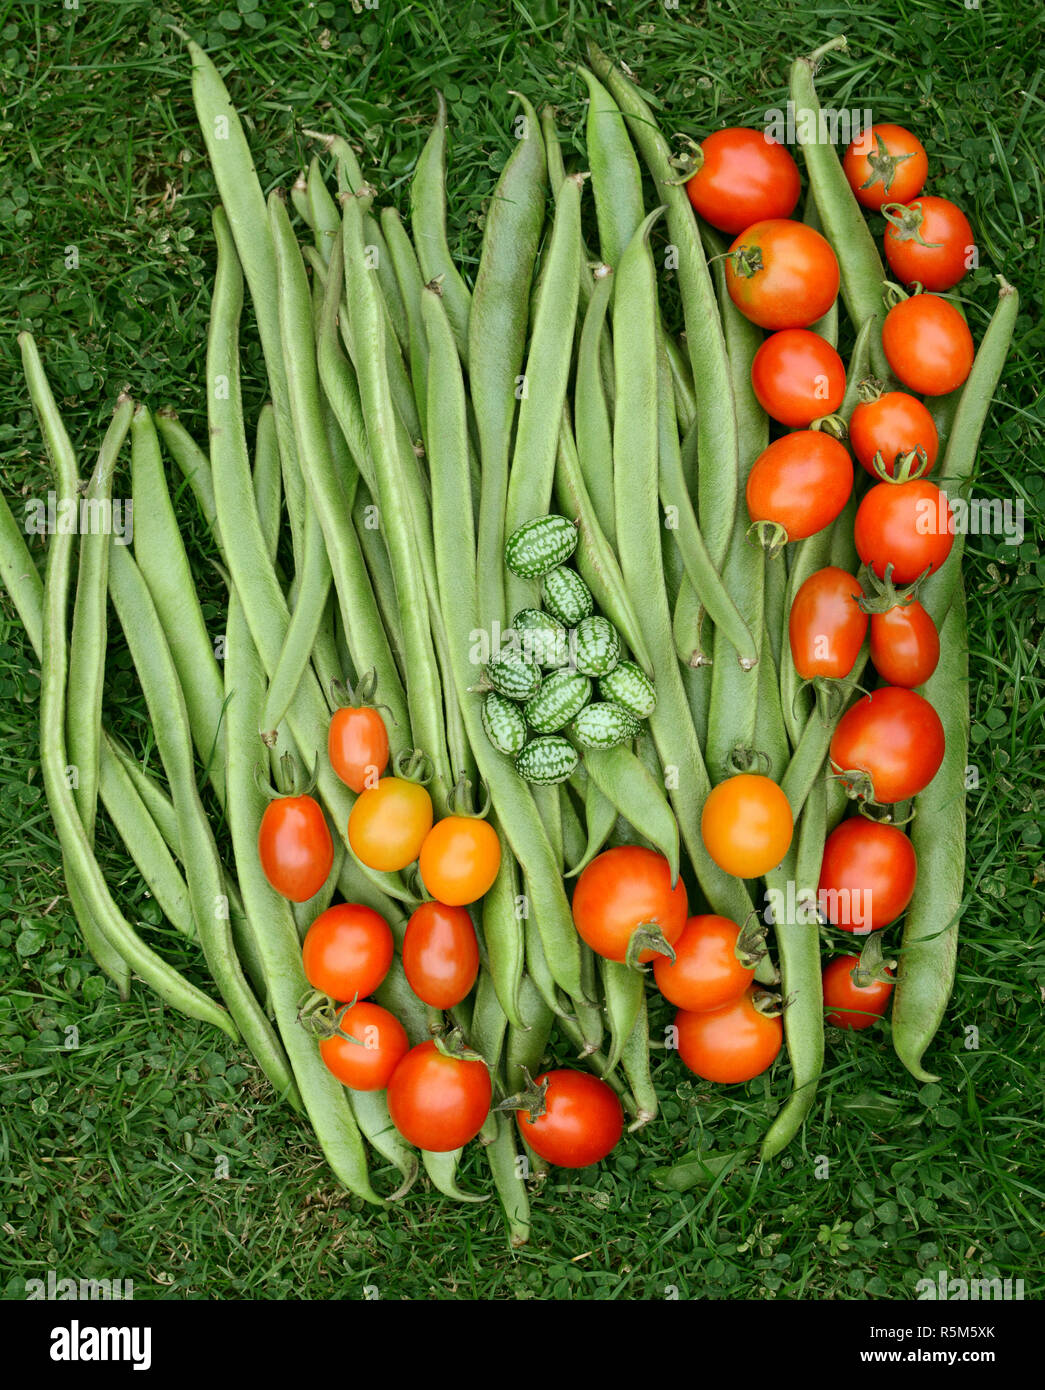 Fresh green runner beans with tomatoes and cucamelons Stock Photo